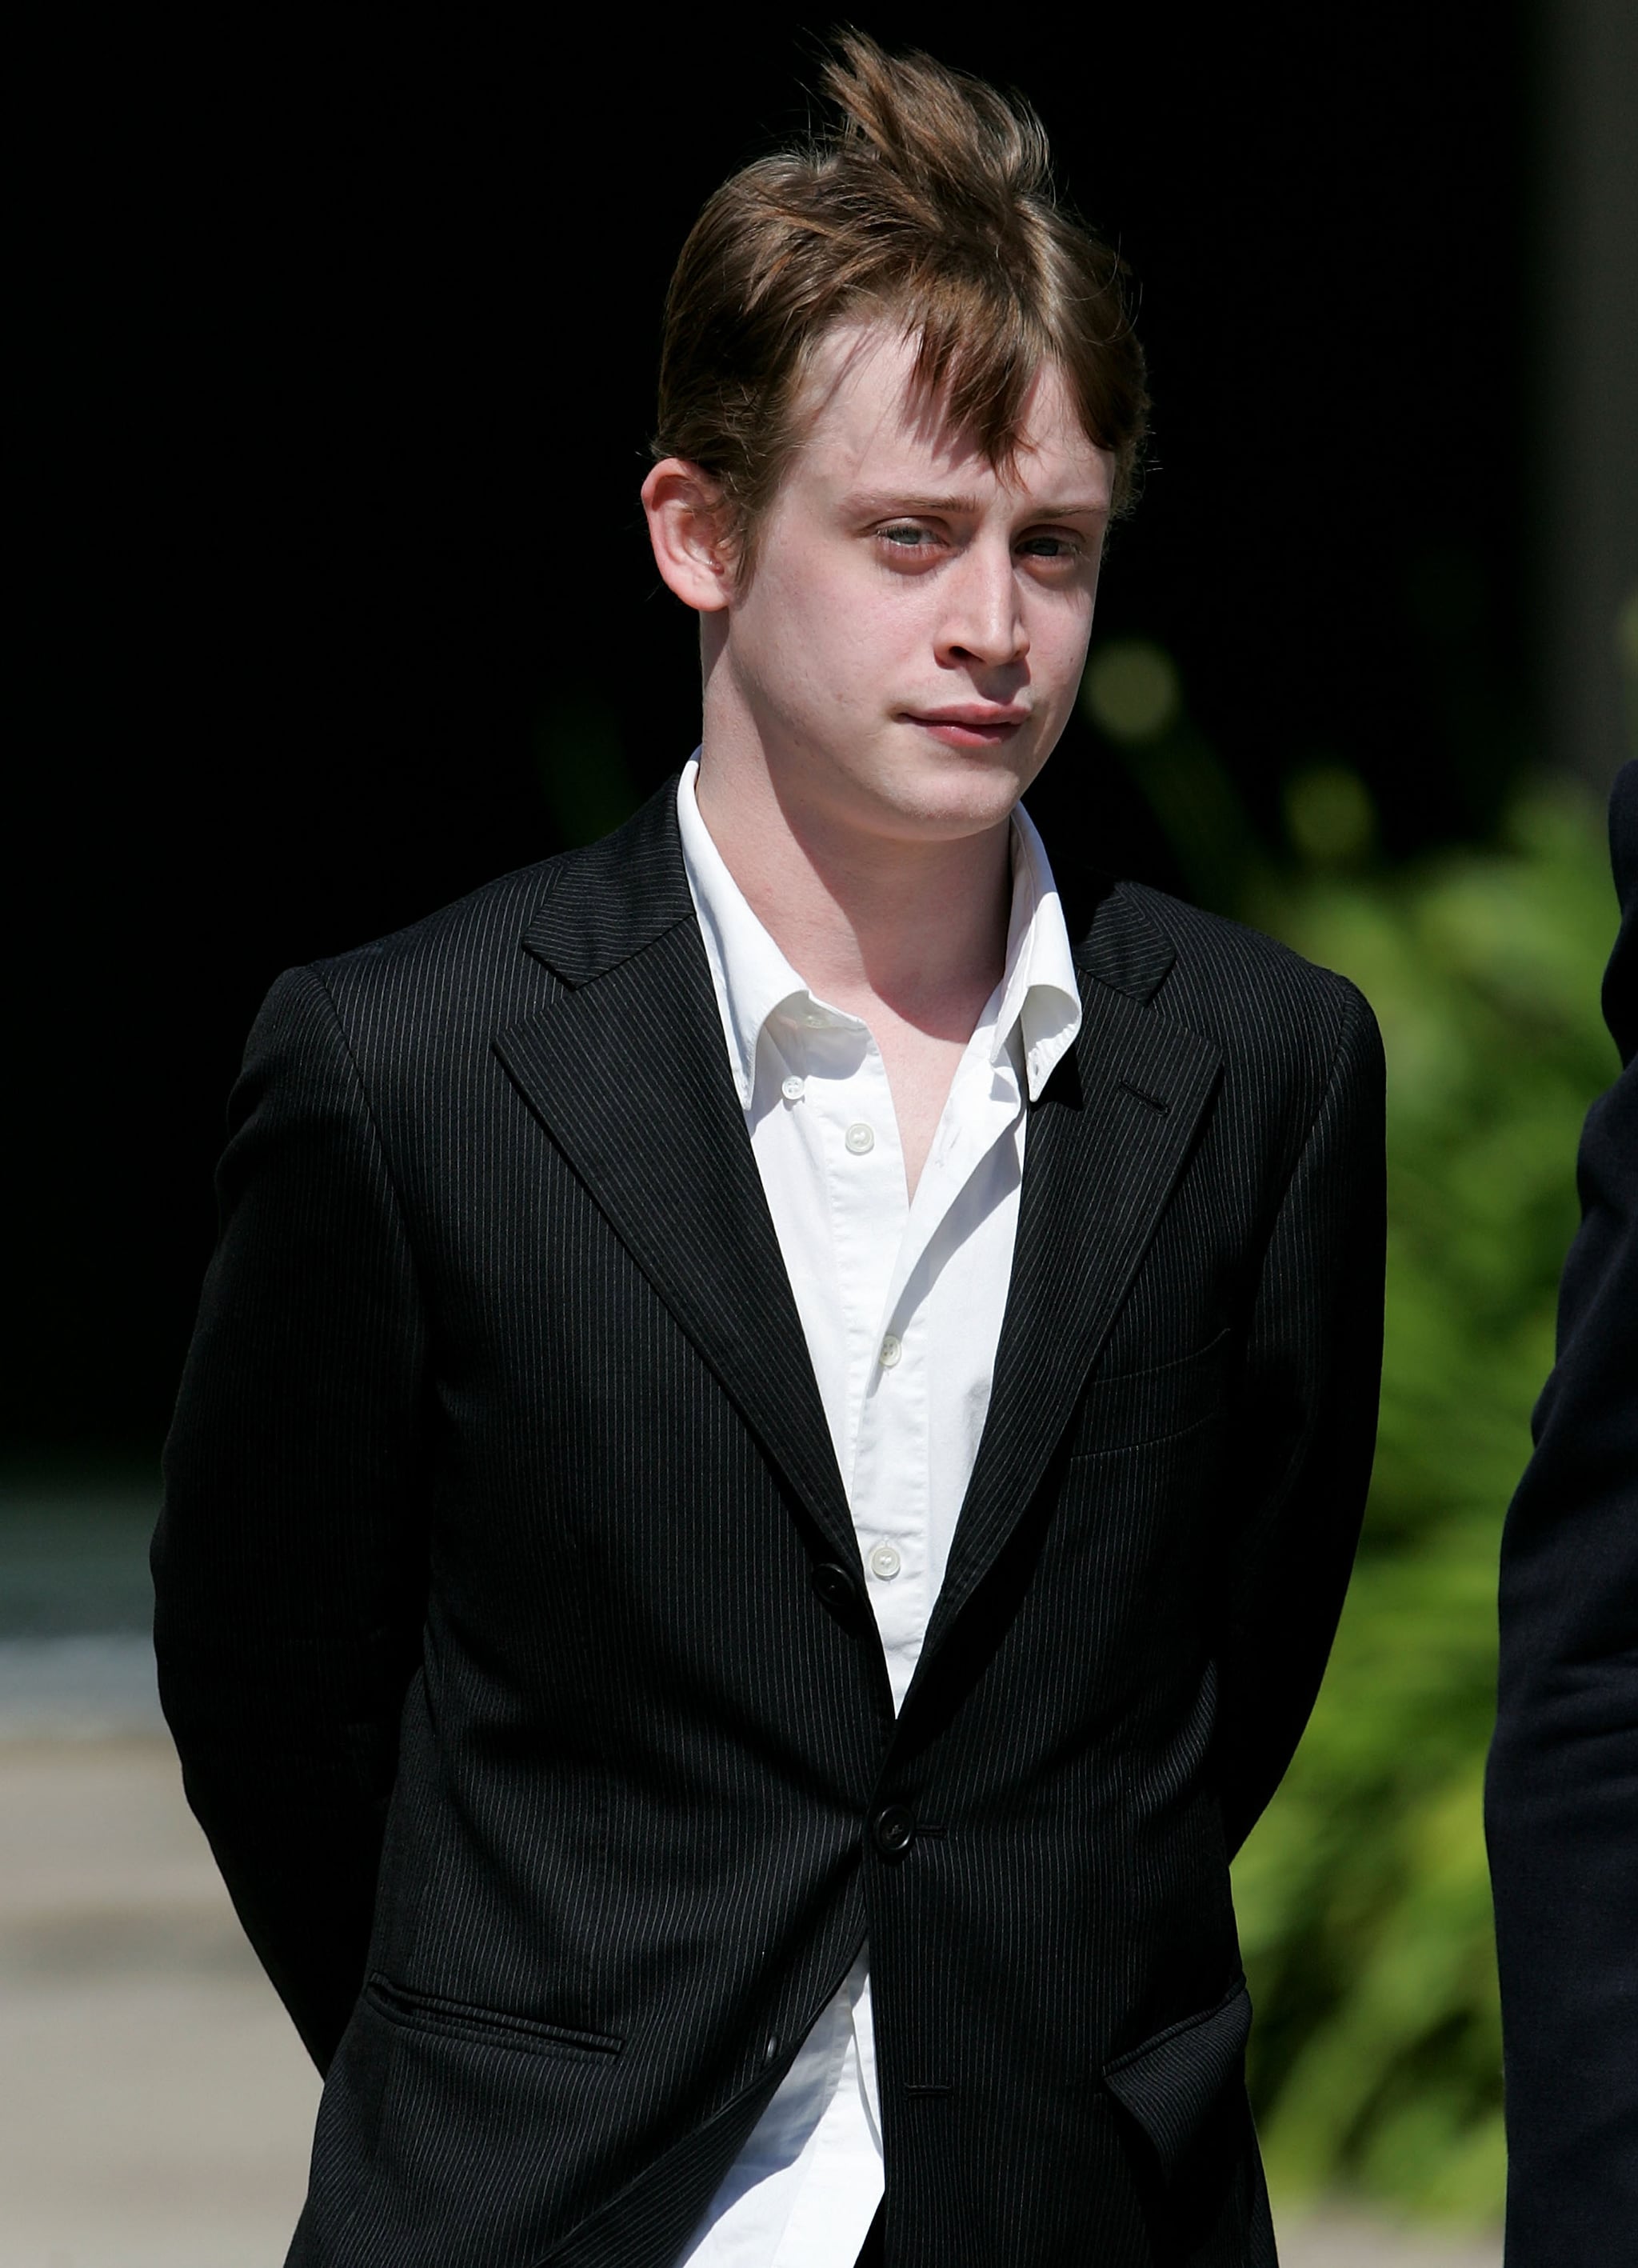 SANTA MARIA, CA - MAY 11:  Actor Macaulay Culkin leaves the Santa Barbara County Courthouse after testifying in Michael Jackson's child molestation trial May 11, 2005 in Santa Maria, California. Jackson is charged in a 10-count indictment with molesting a boy, plying him with liquor and conspiring to commit child abduction, false imprisonment and extortion.  (Photo by Justin Sullivan/Getty Images)